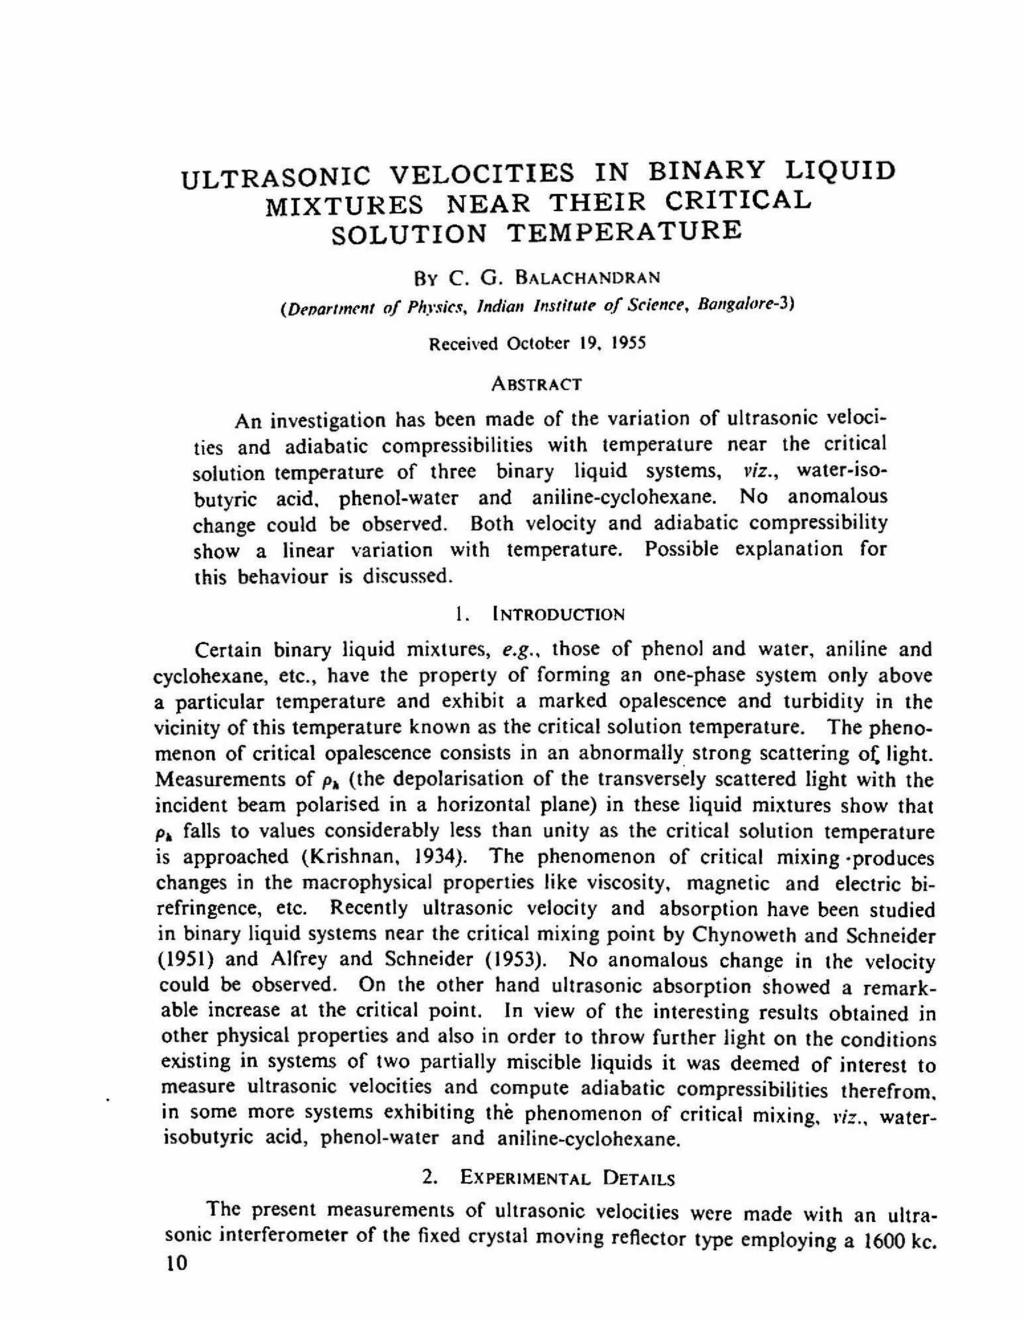 ULTRASONIC VELOCITIES IN BINARY LIQUID MIXTURES NEAR THEIR CRITICAL SOLUTION TEMPERATURE BY C. G. BALACHANDRAN (Department of Physics, Indian Institute of Science, Bangalore-3) Received October 19.